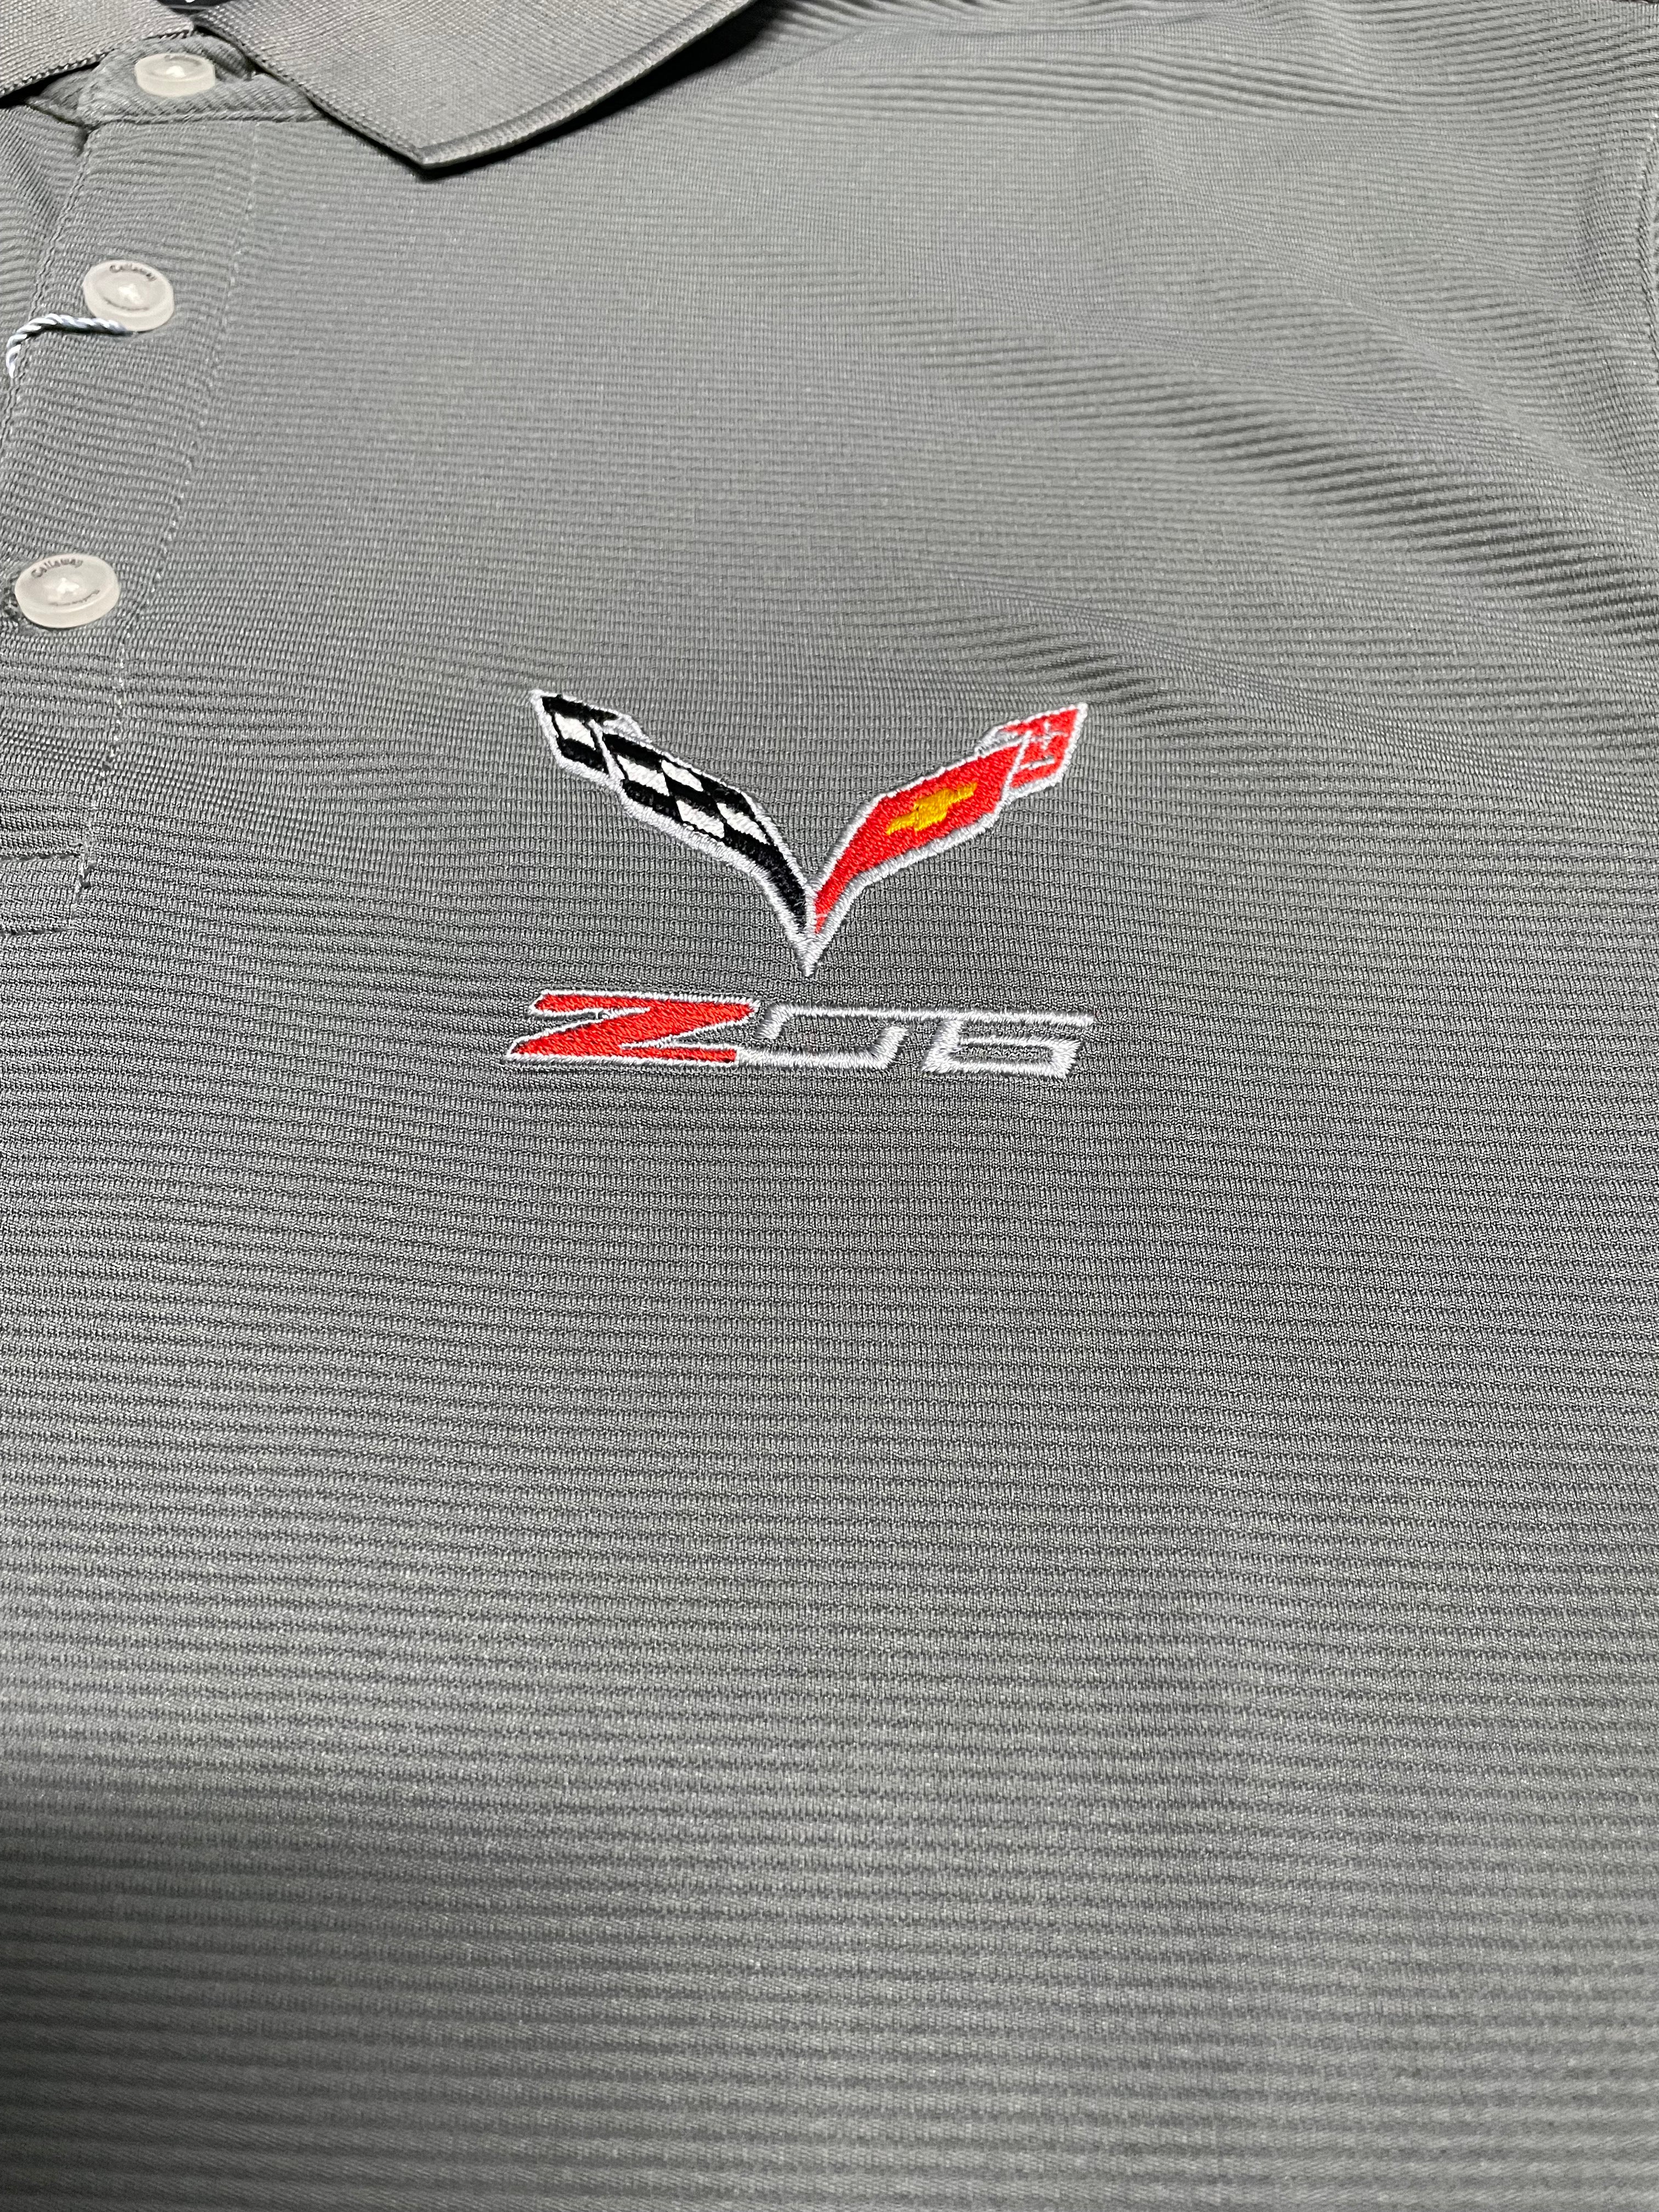 C7 Corvette Embroidered Textured Polo Shirt - Gray : C7 Z06